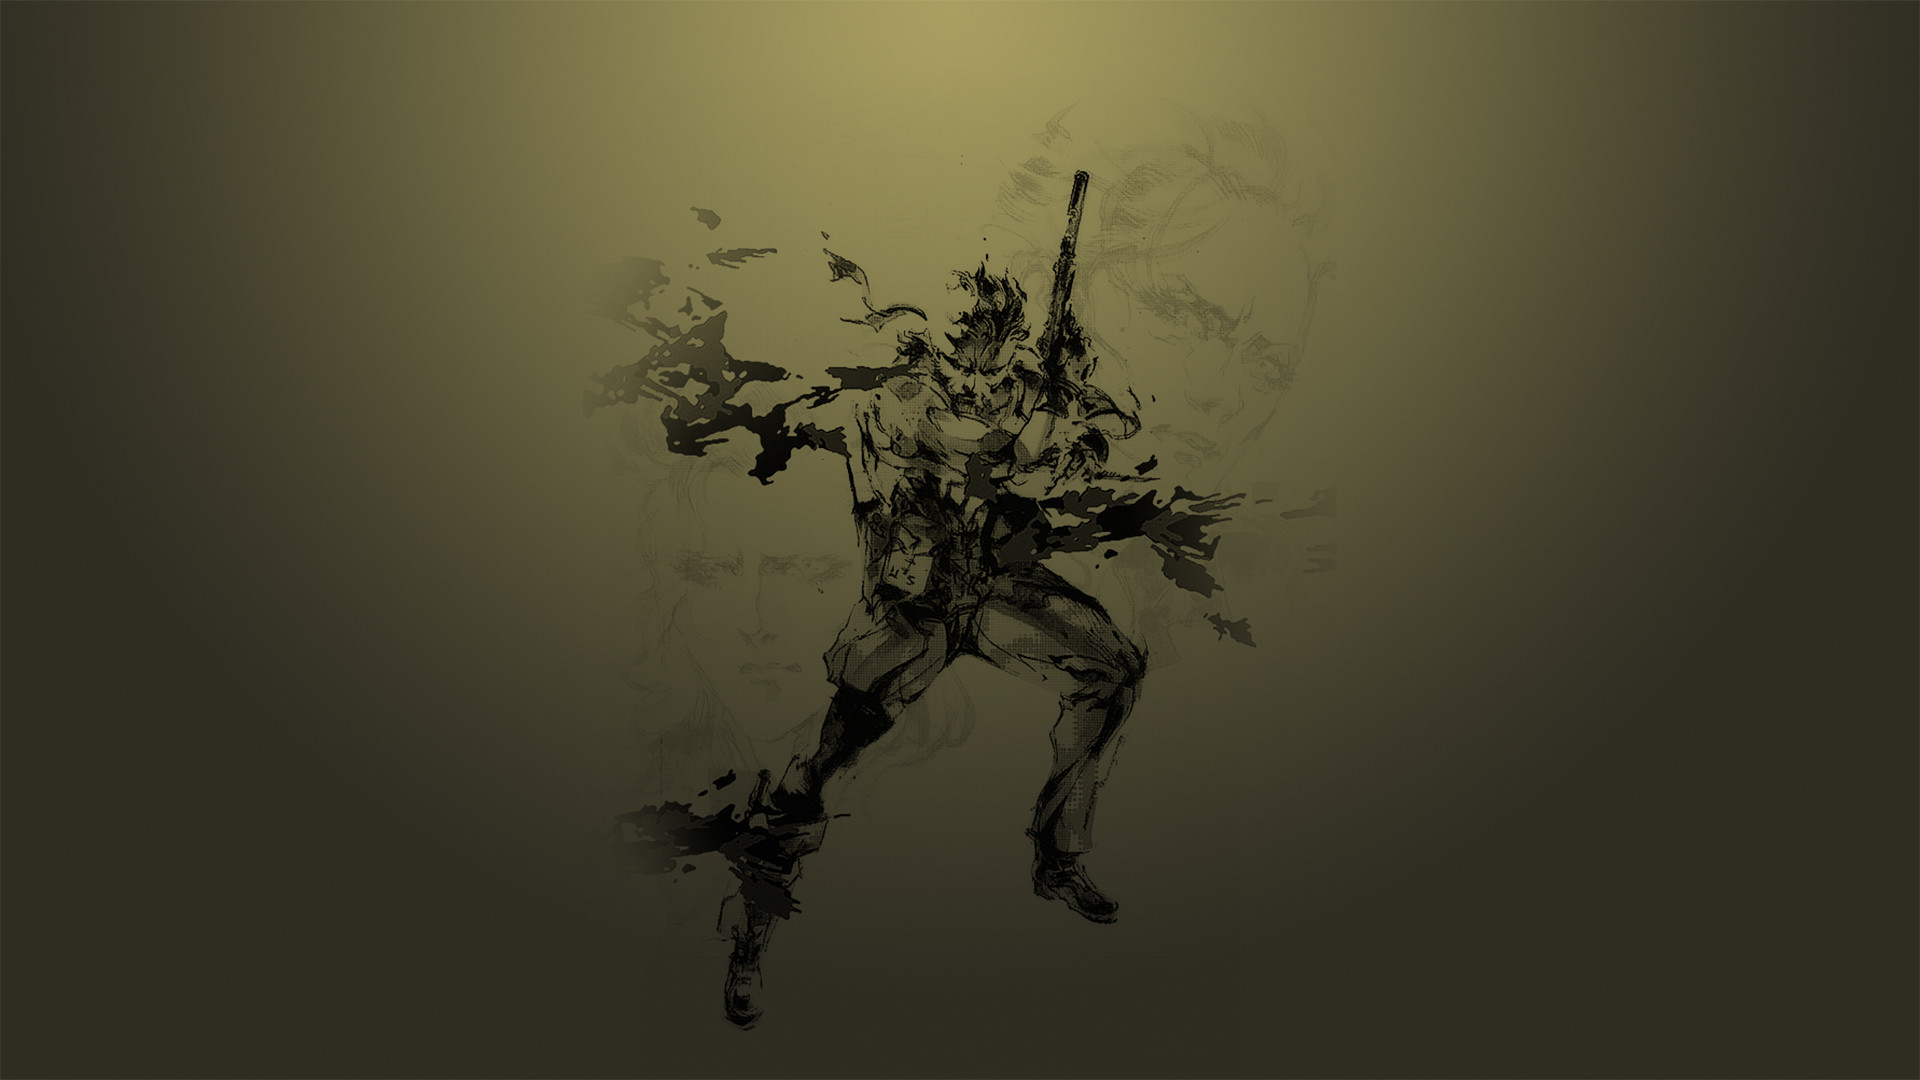 Mgs3 Wallpaper Imgkid The Image Kid Has It